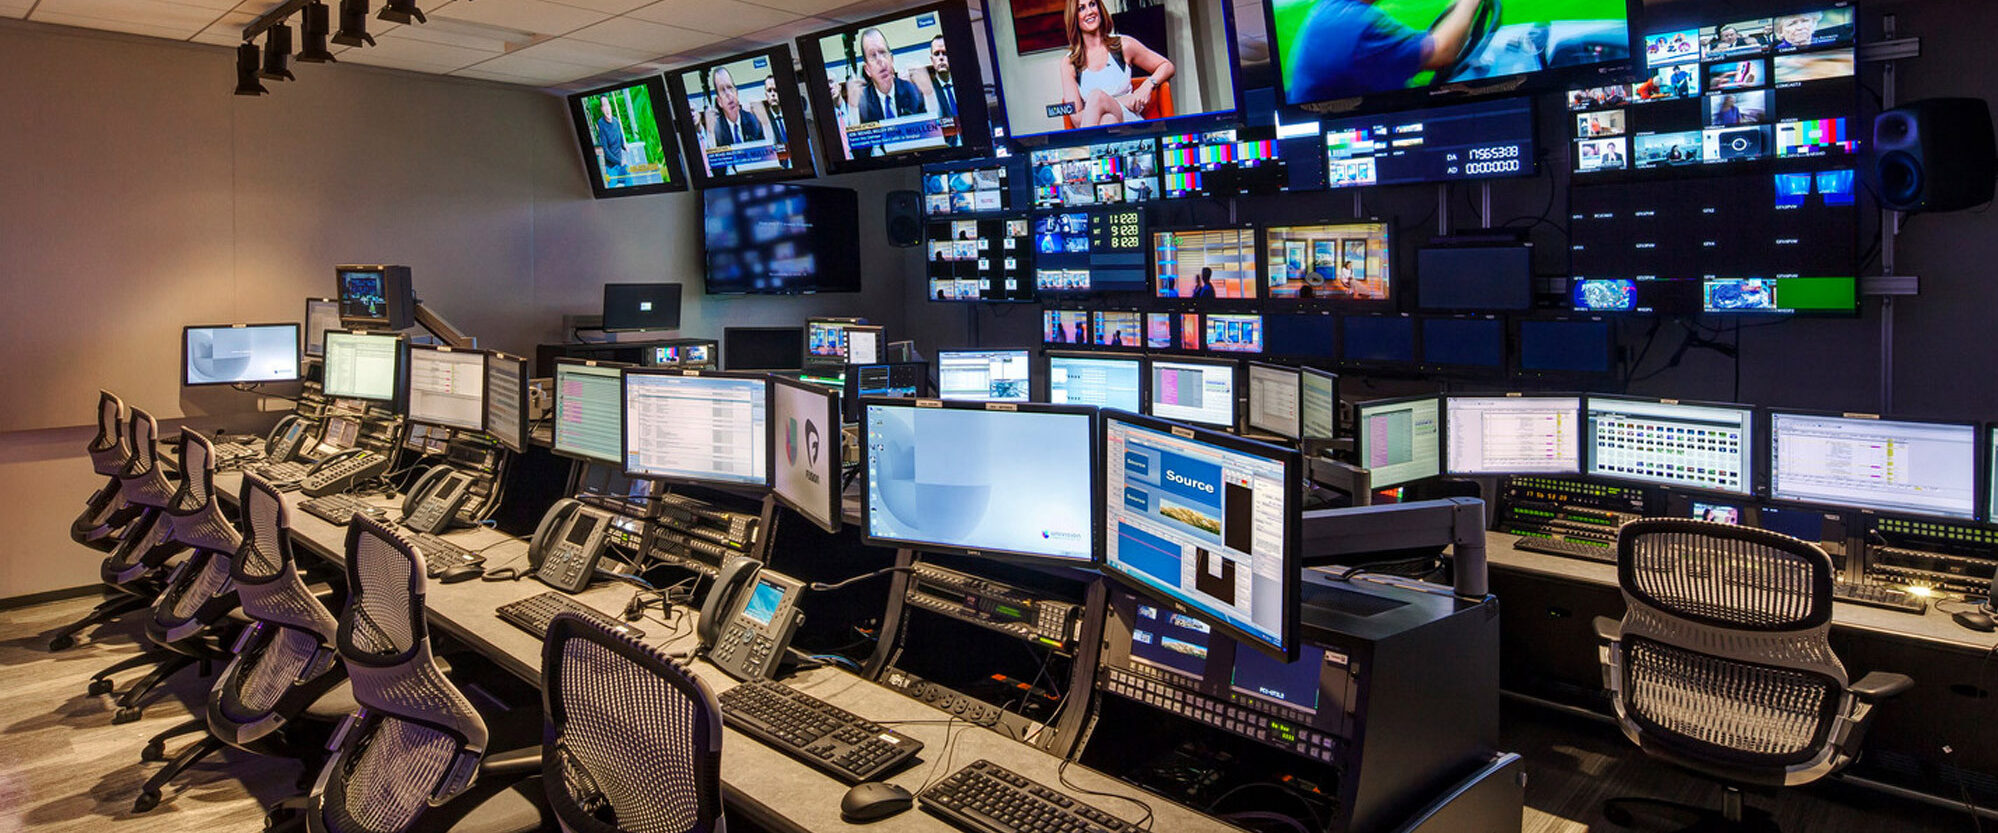 Modern broadcast control room lined with multi-screen display panels. Ergonomic chairs and sophisticated audio-visual equipment adorn the space, reflecting a high-tech, efficient workplace designed for media monitoring and production tasks.